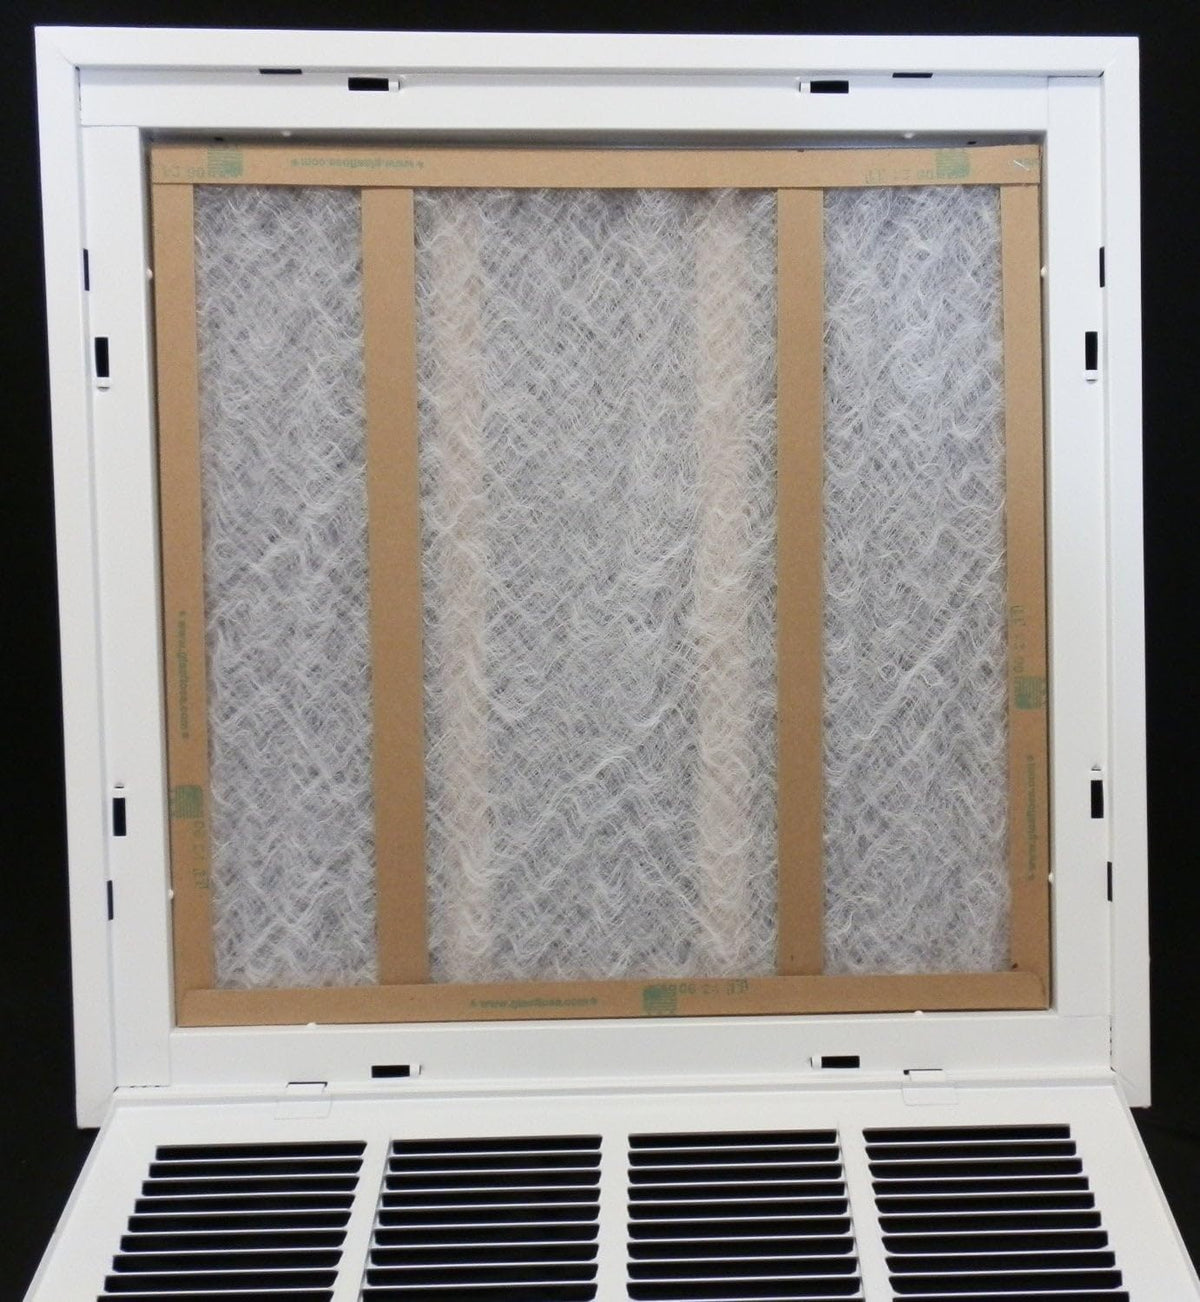 8&quot; X 26&quot; Steel Return Air Filter Grille for 1&quot; Filter - Removable Frame - [Outer Dimensions: 10 5/8&quot; X 28 5/8&quot;]